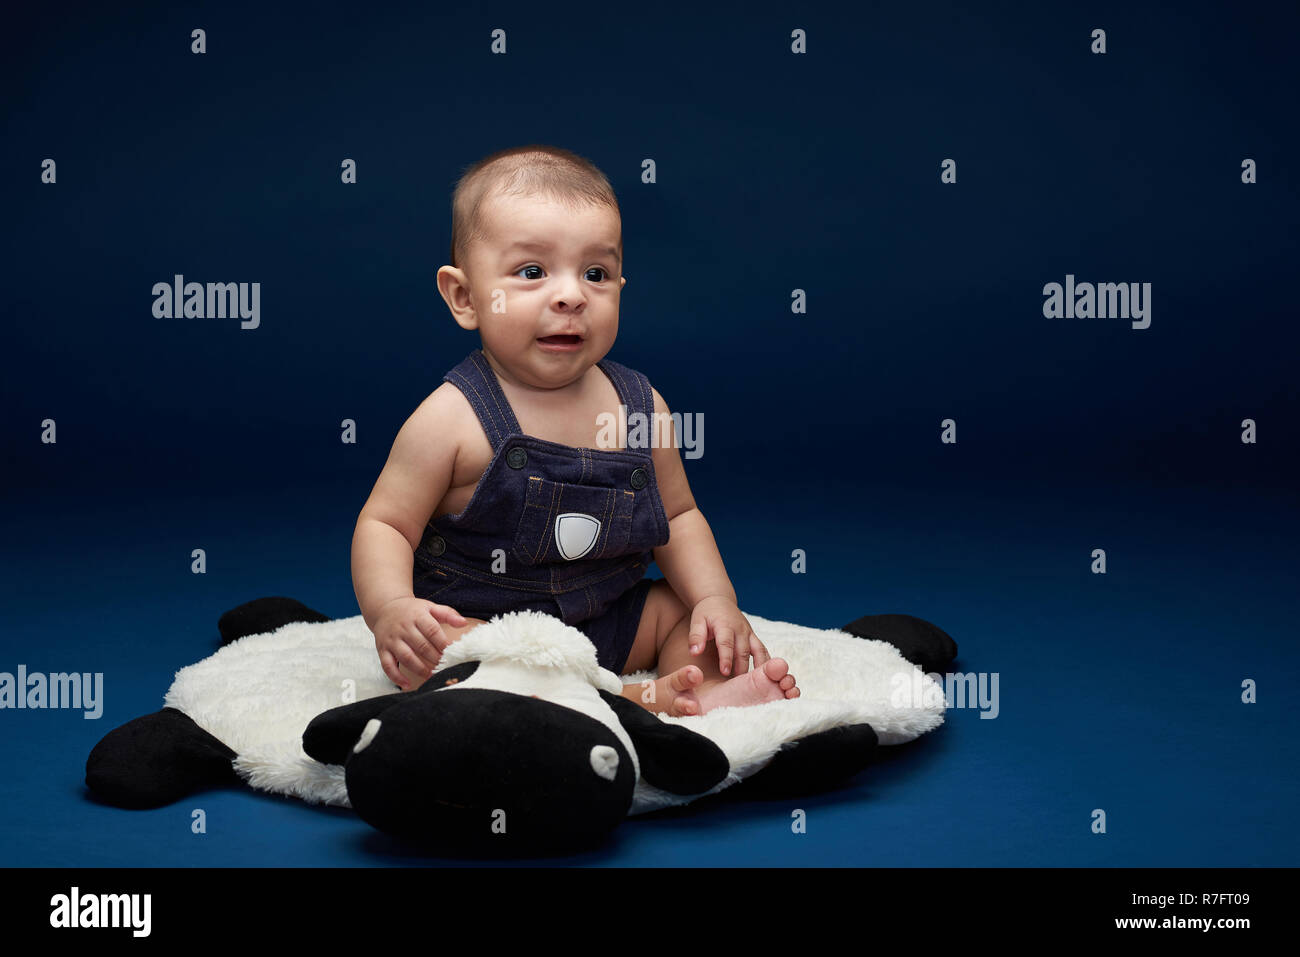 Scared baby boy sit on pillow in blue studio background Stock Photo